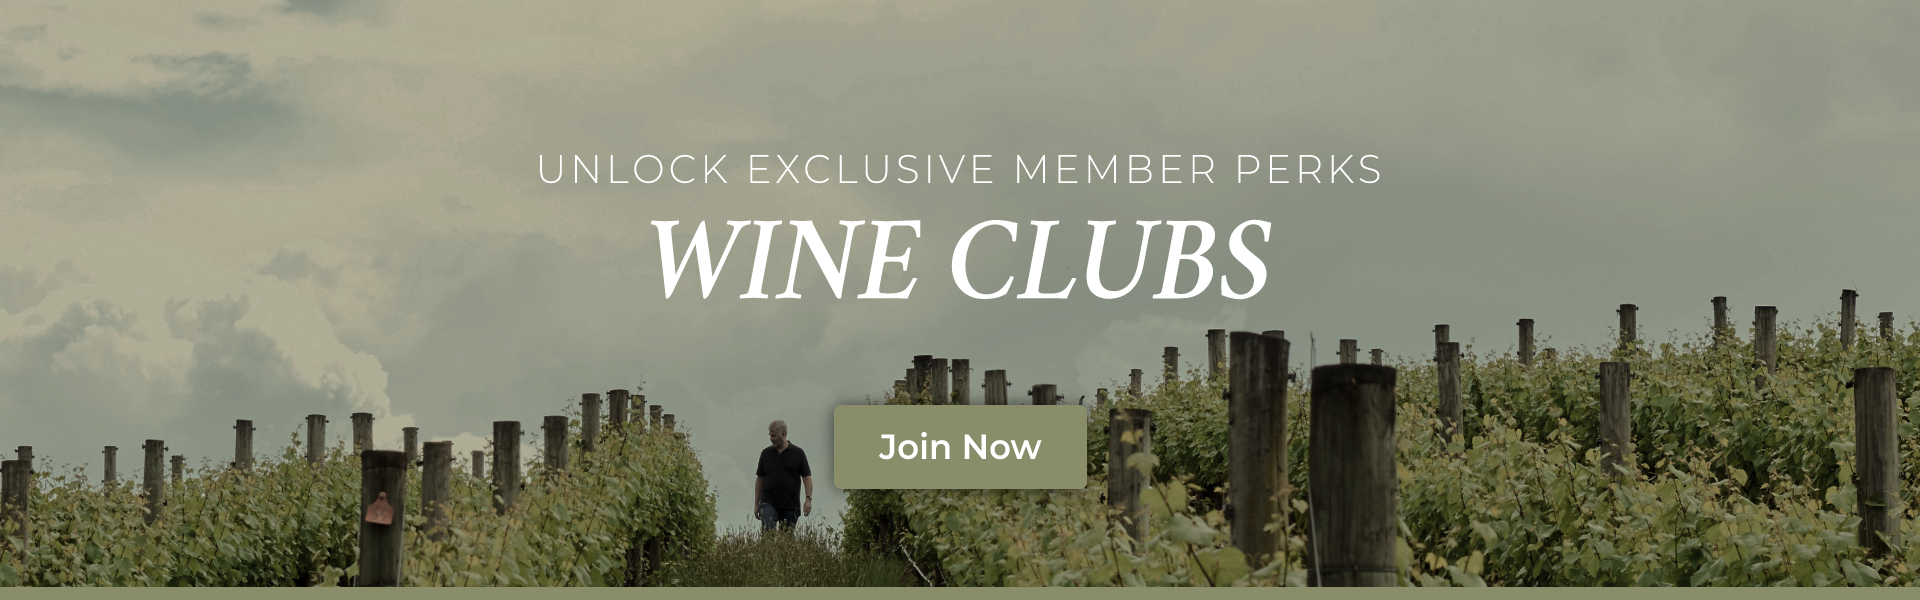 Join the Wine Club to unlock exclusive memebr perks